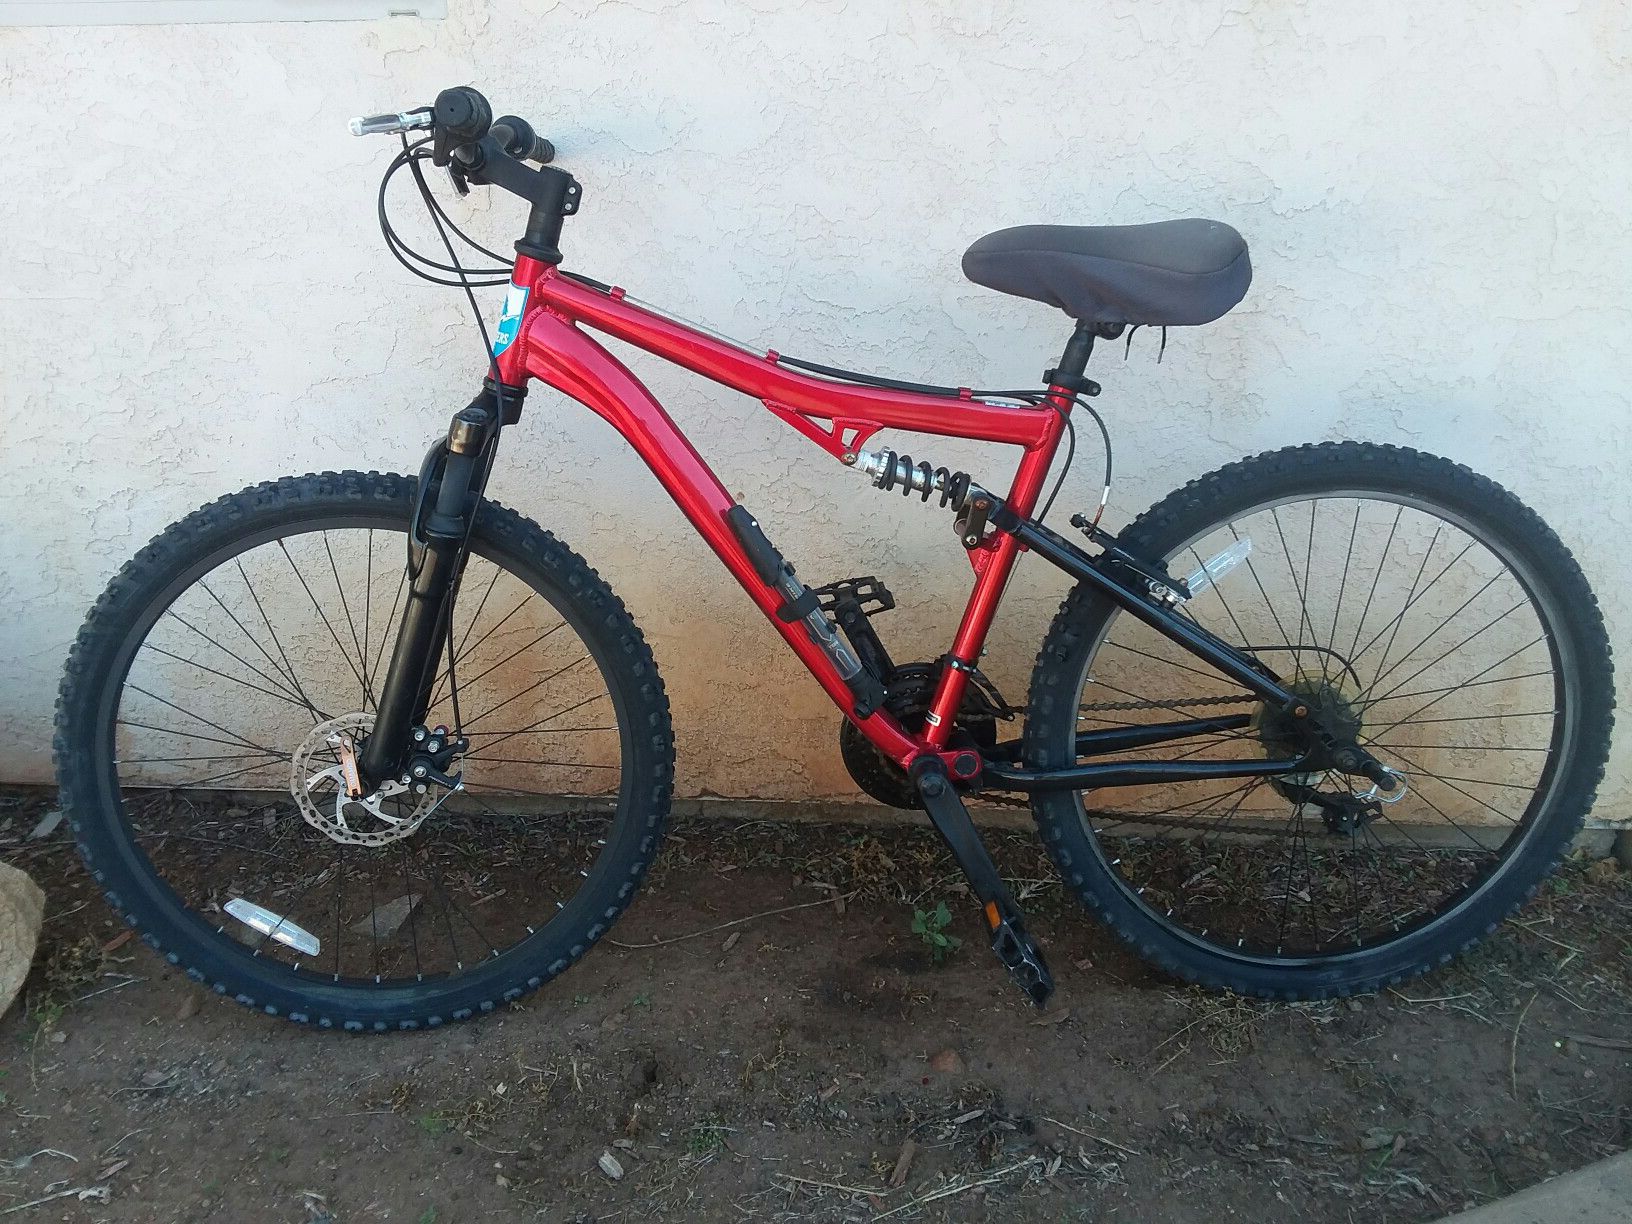 Mtn Bike 26" with tire pump